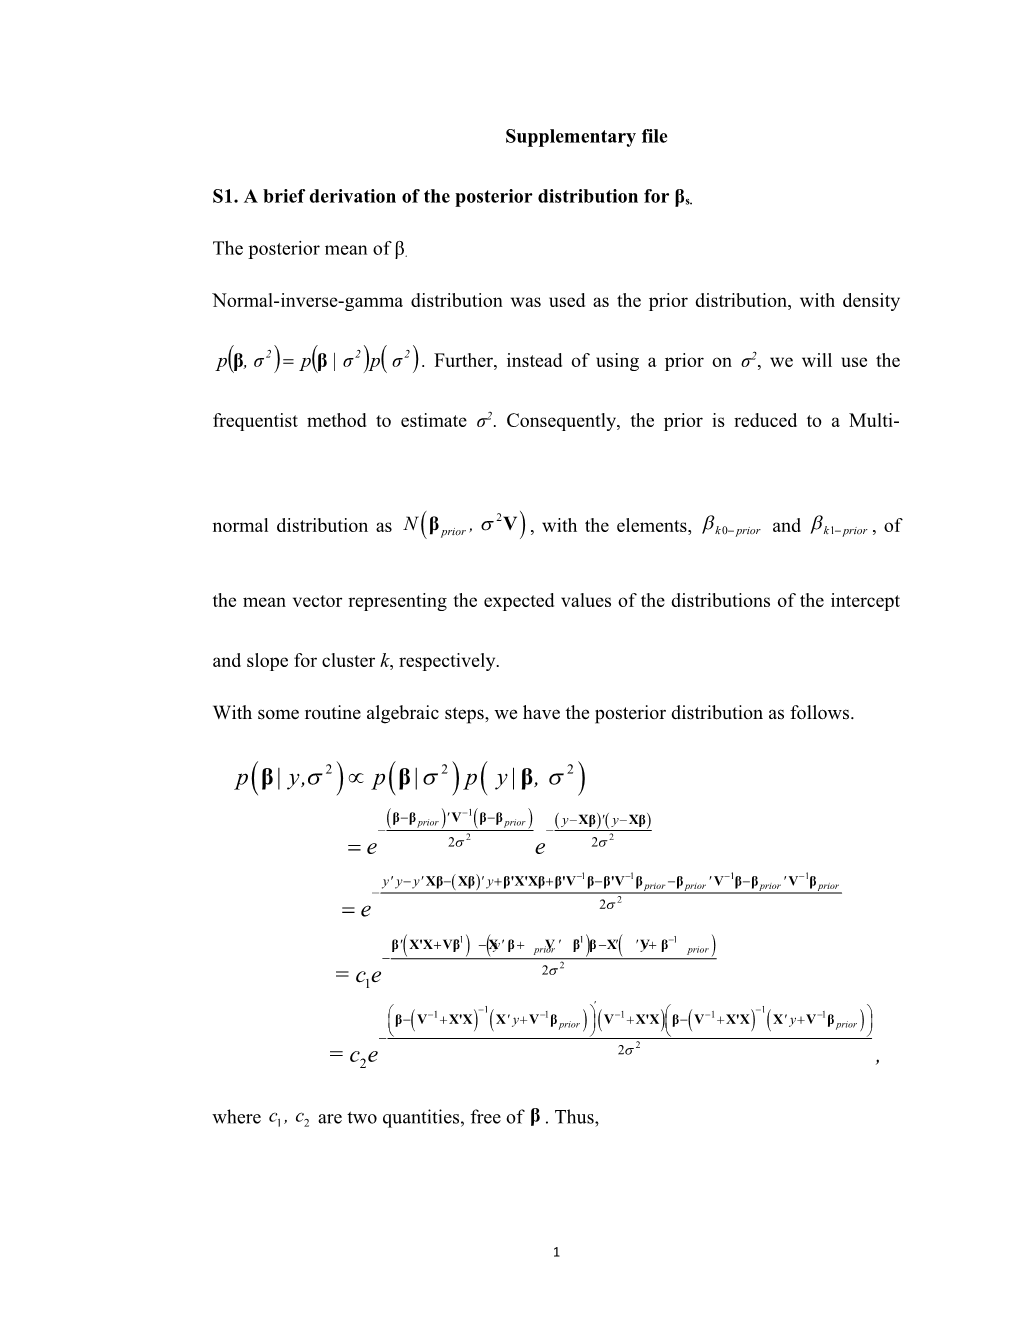 S1. a Brief Derivation of the Posterior Distribution for Βs